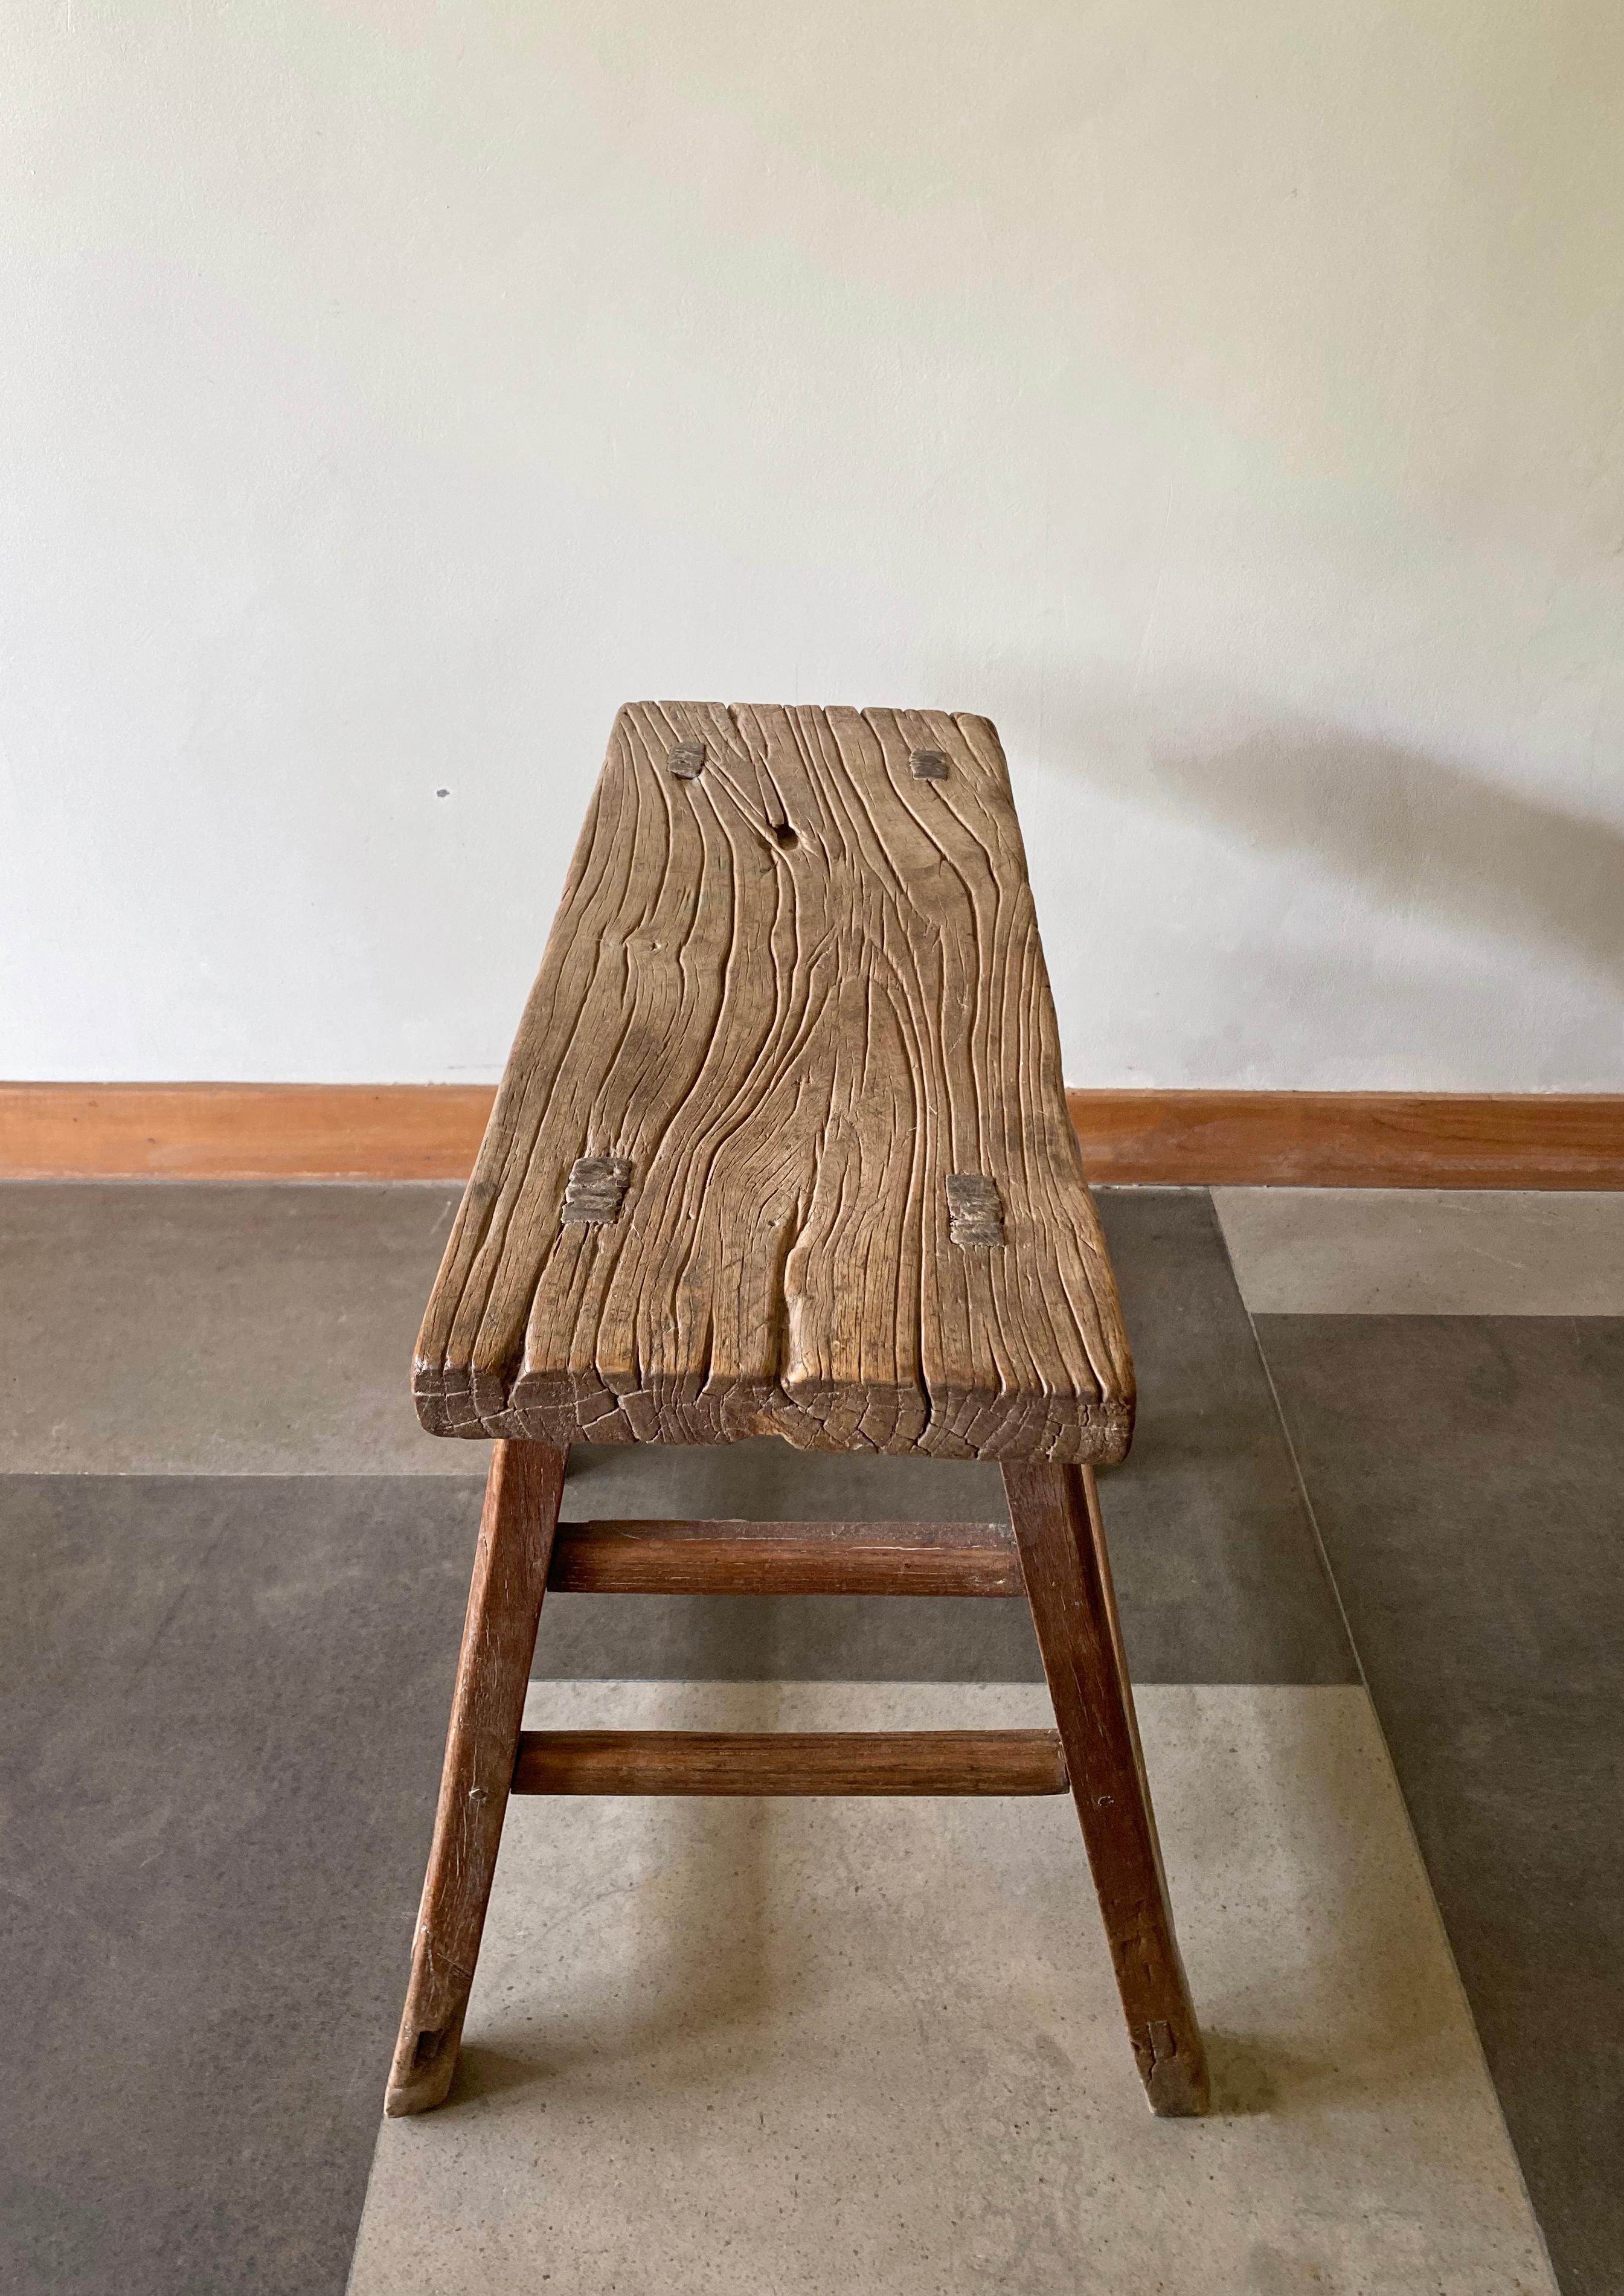 Antique Chinese Elm Wood Stool, Early 20th Century For Sale 1